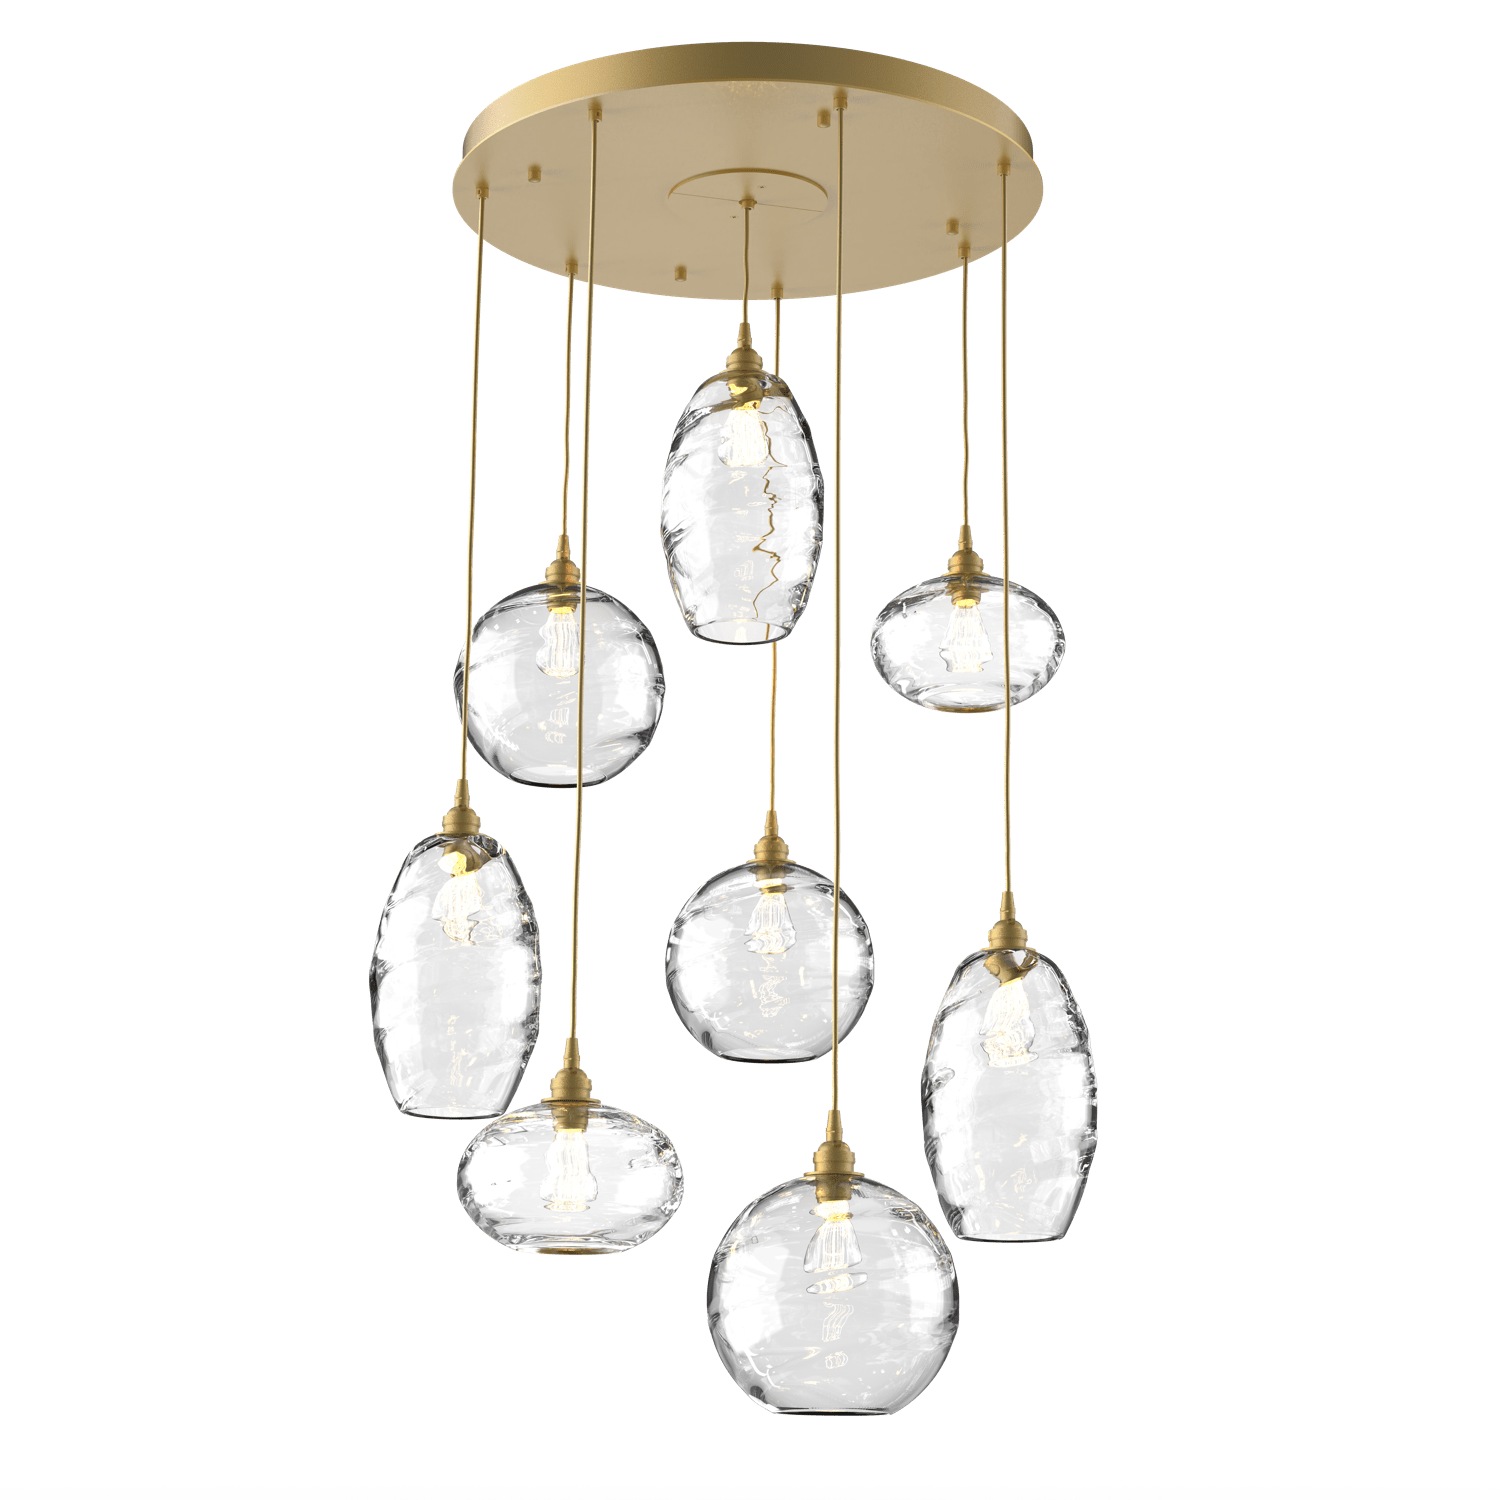 CHB0048-08-GB-OC-Hammerton-Studio-Optic-Blown-Glass-Misto-8-light-round-pendant-chandelier-with-gilded-brass-finish-and-optic-clear-blown-glass-shades-and-incandescent-lamping